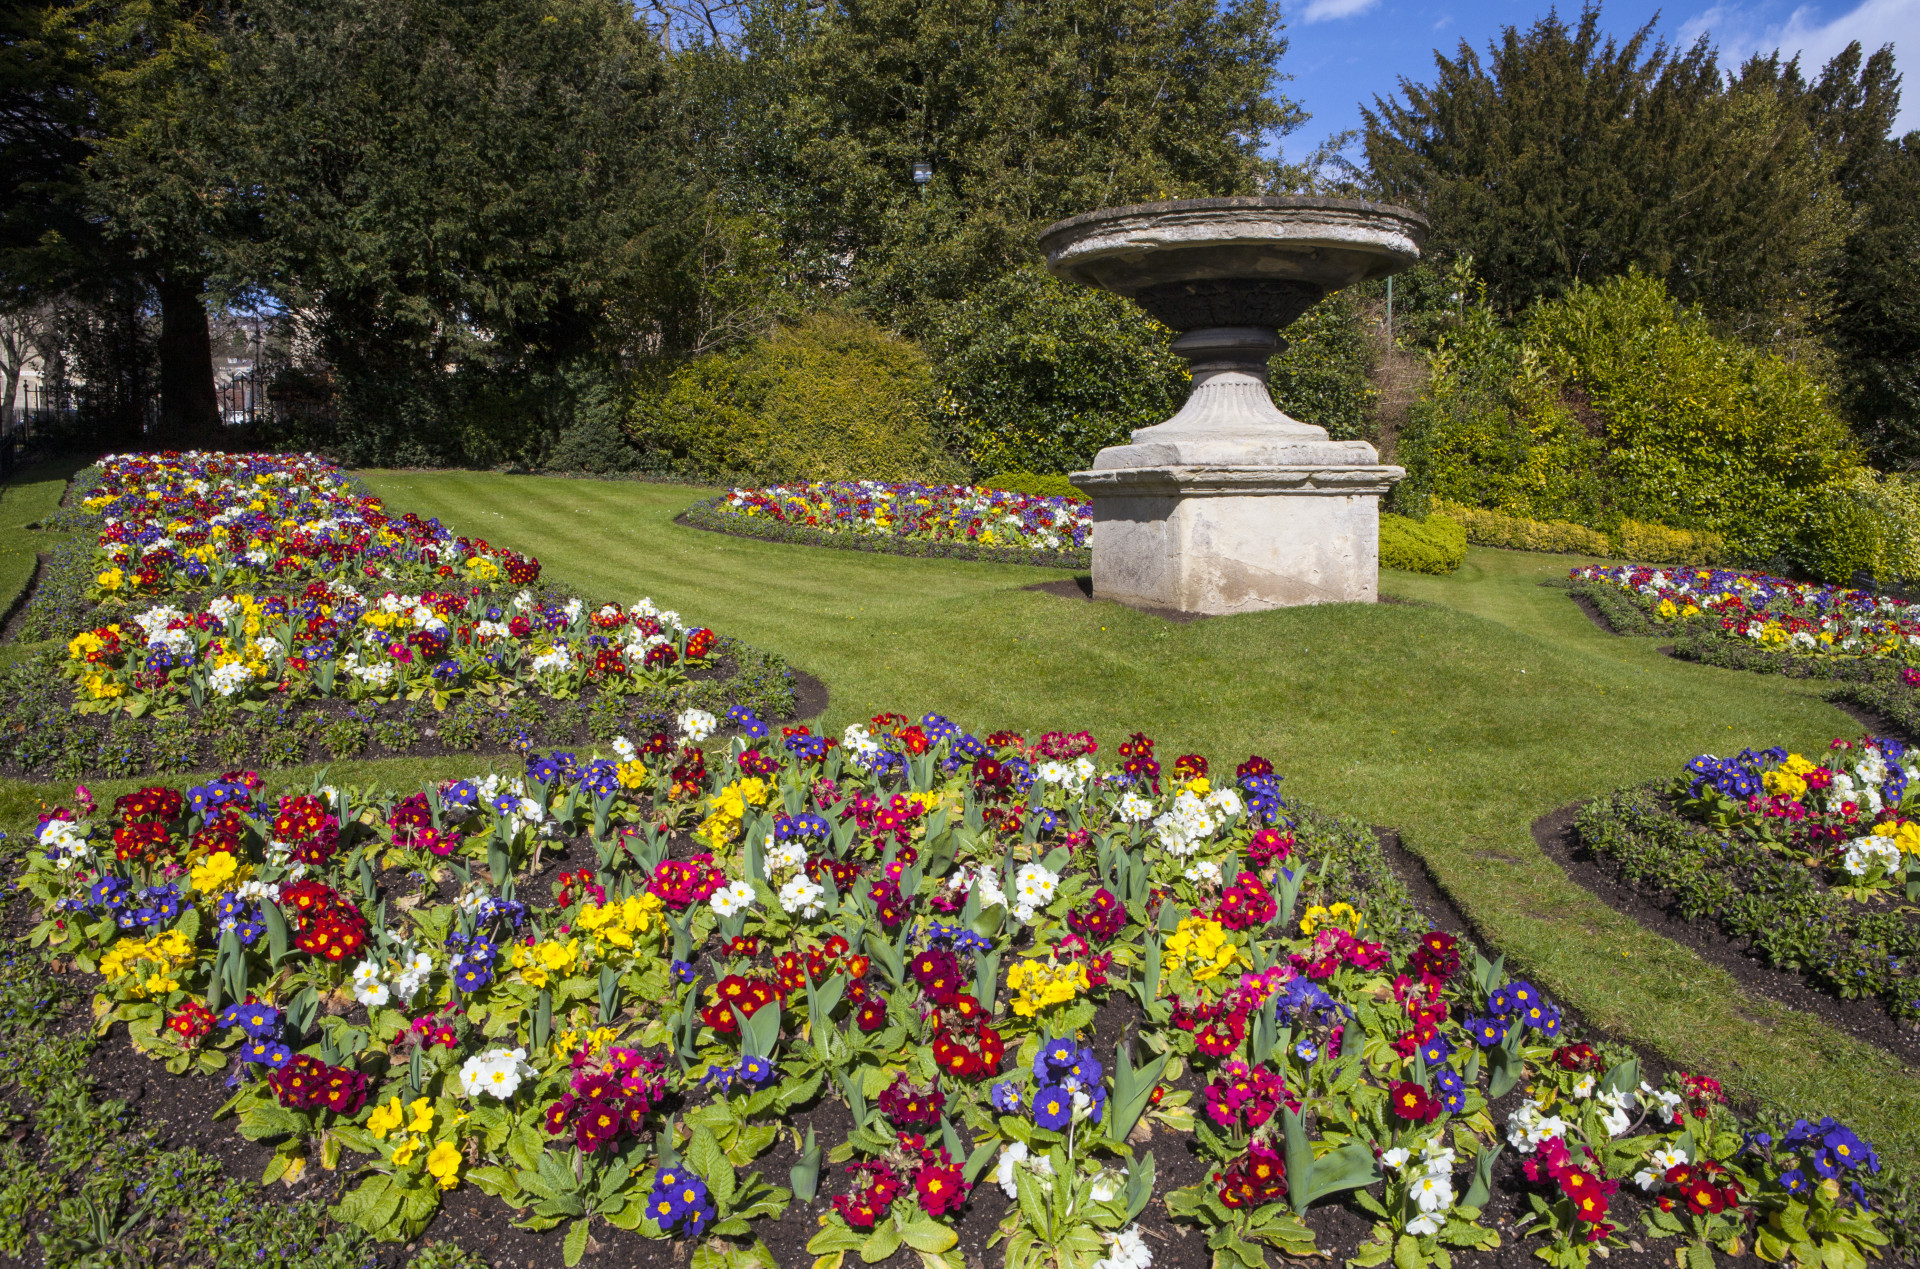 Royal Victoria Park is an English garden-style family park dedicated to the late Queen Victoria. Guests can experience its many attractions including an 18-hole mini golf course, climbing frames, zip lines and a skate park.